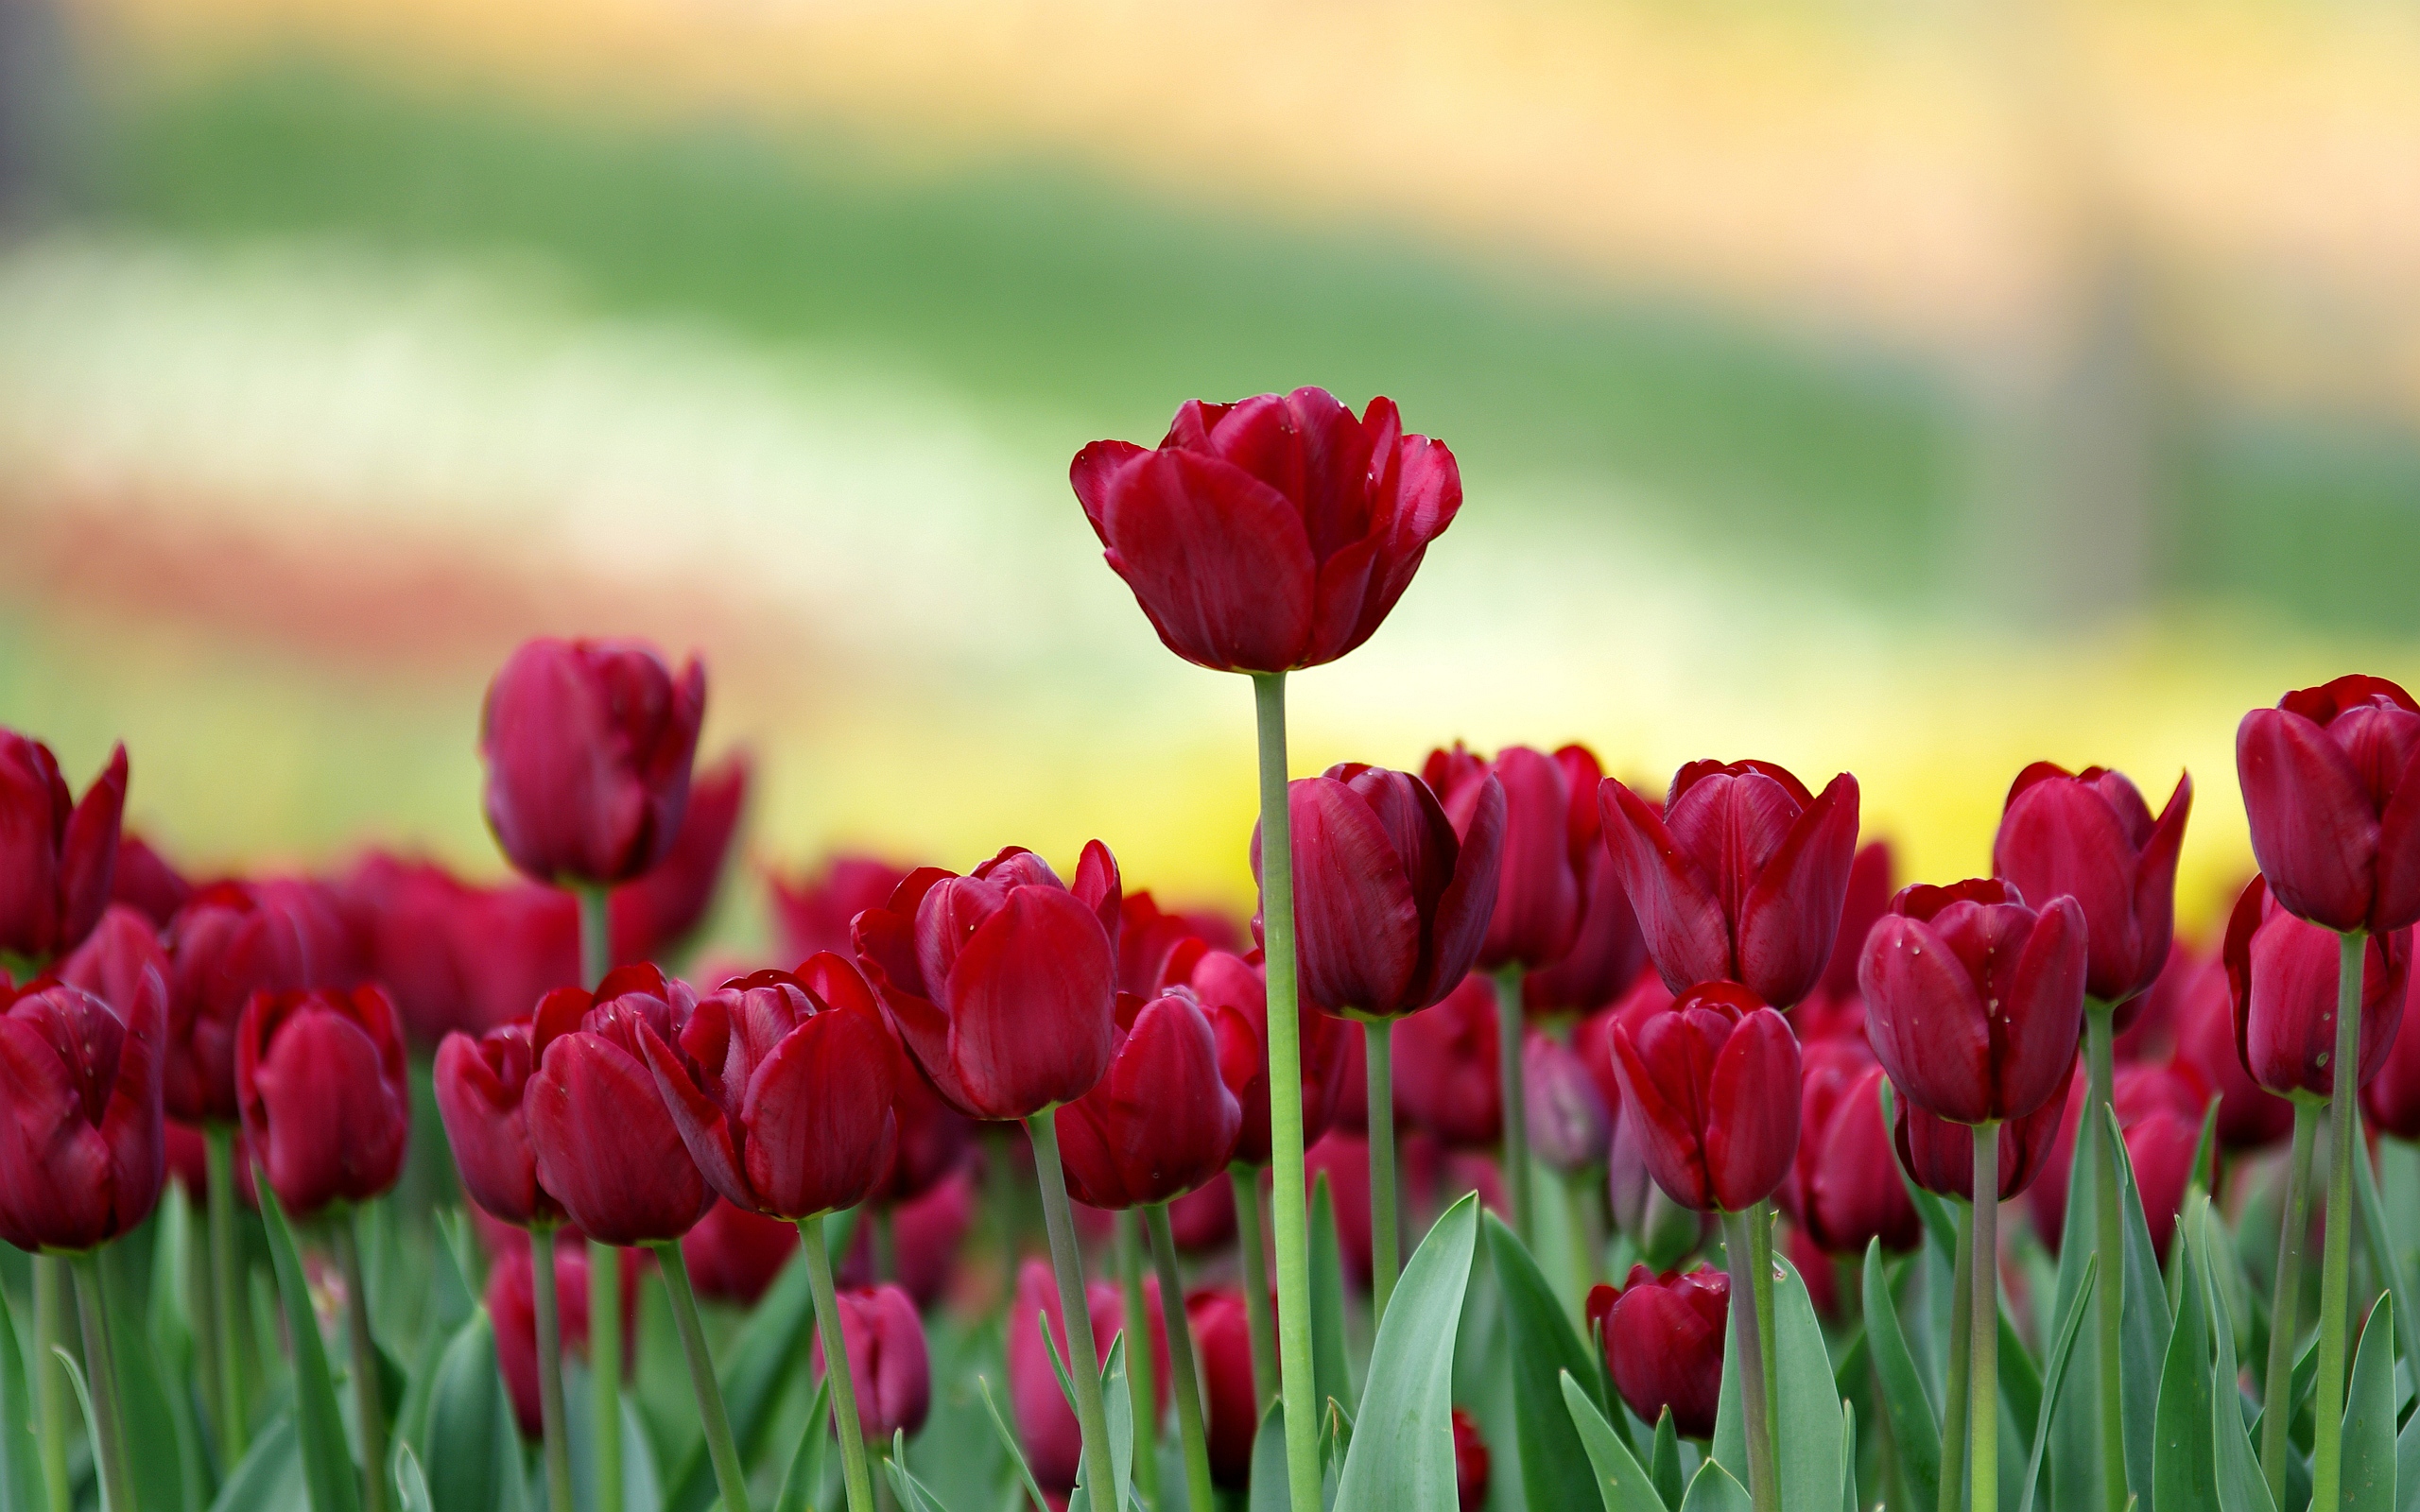 Tulip Flowers Wallpaper Wallpapers, Backgrounds, Images, Art Photos